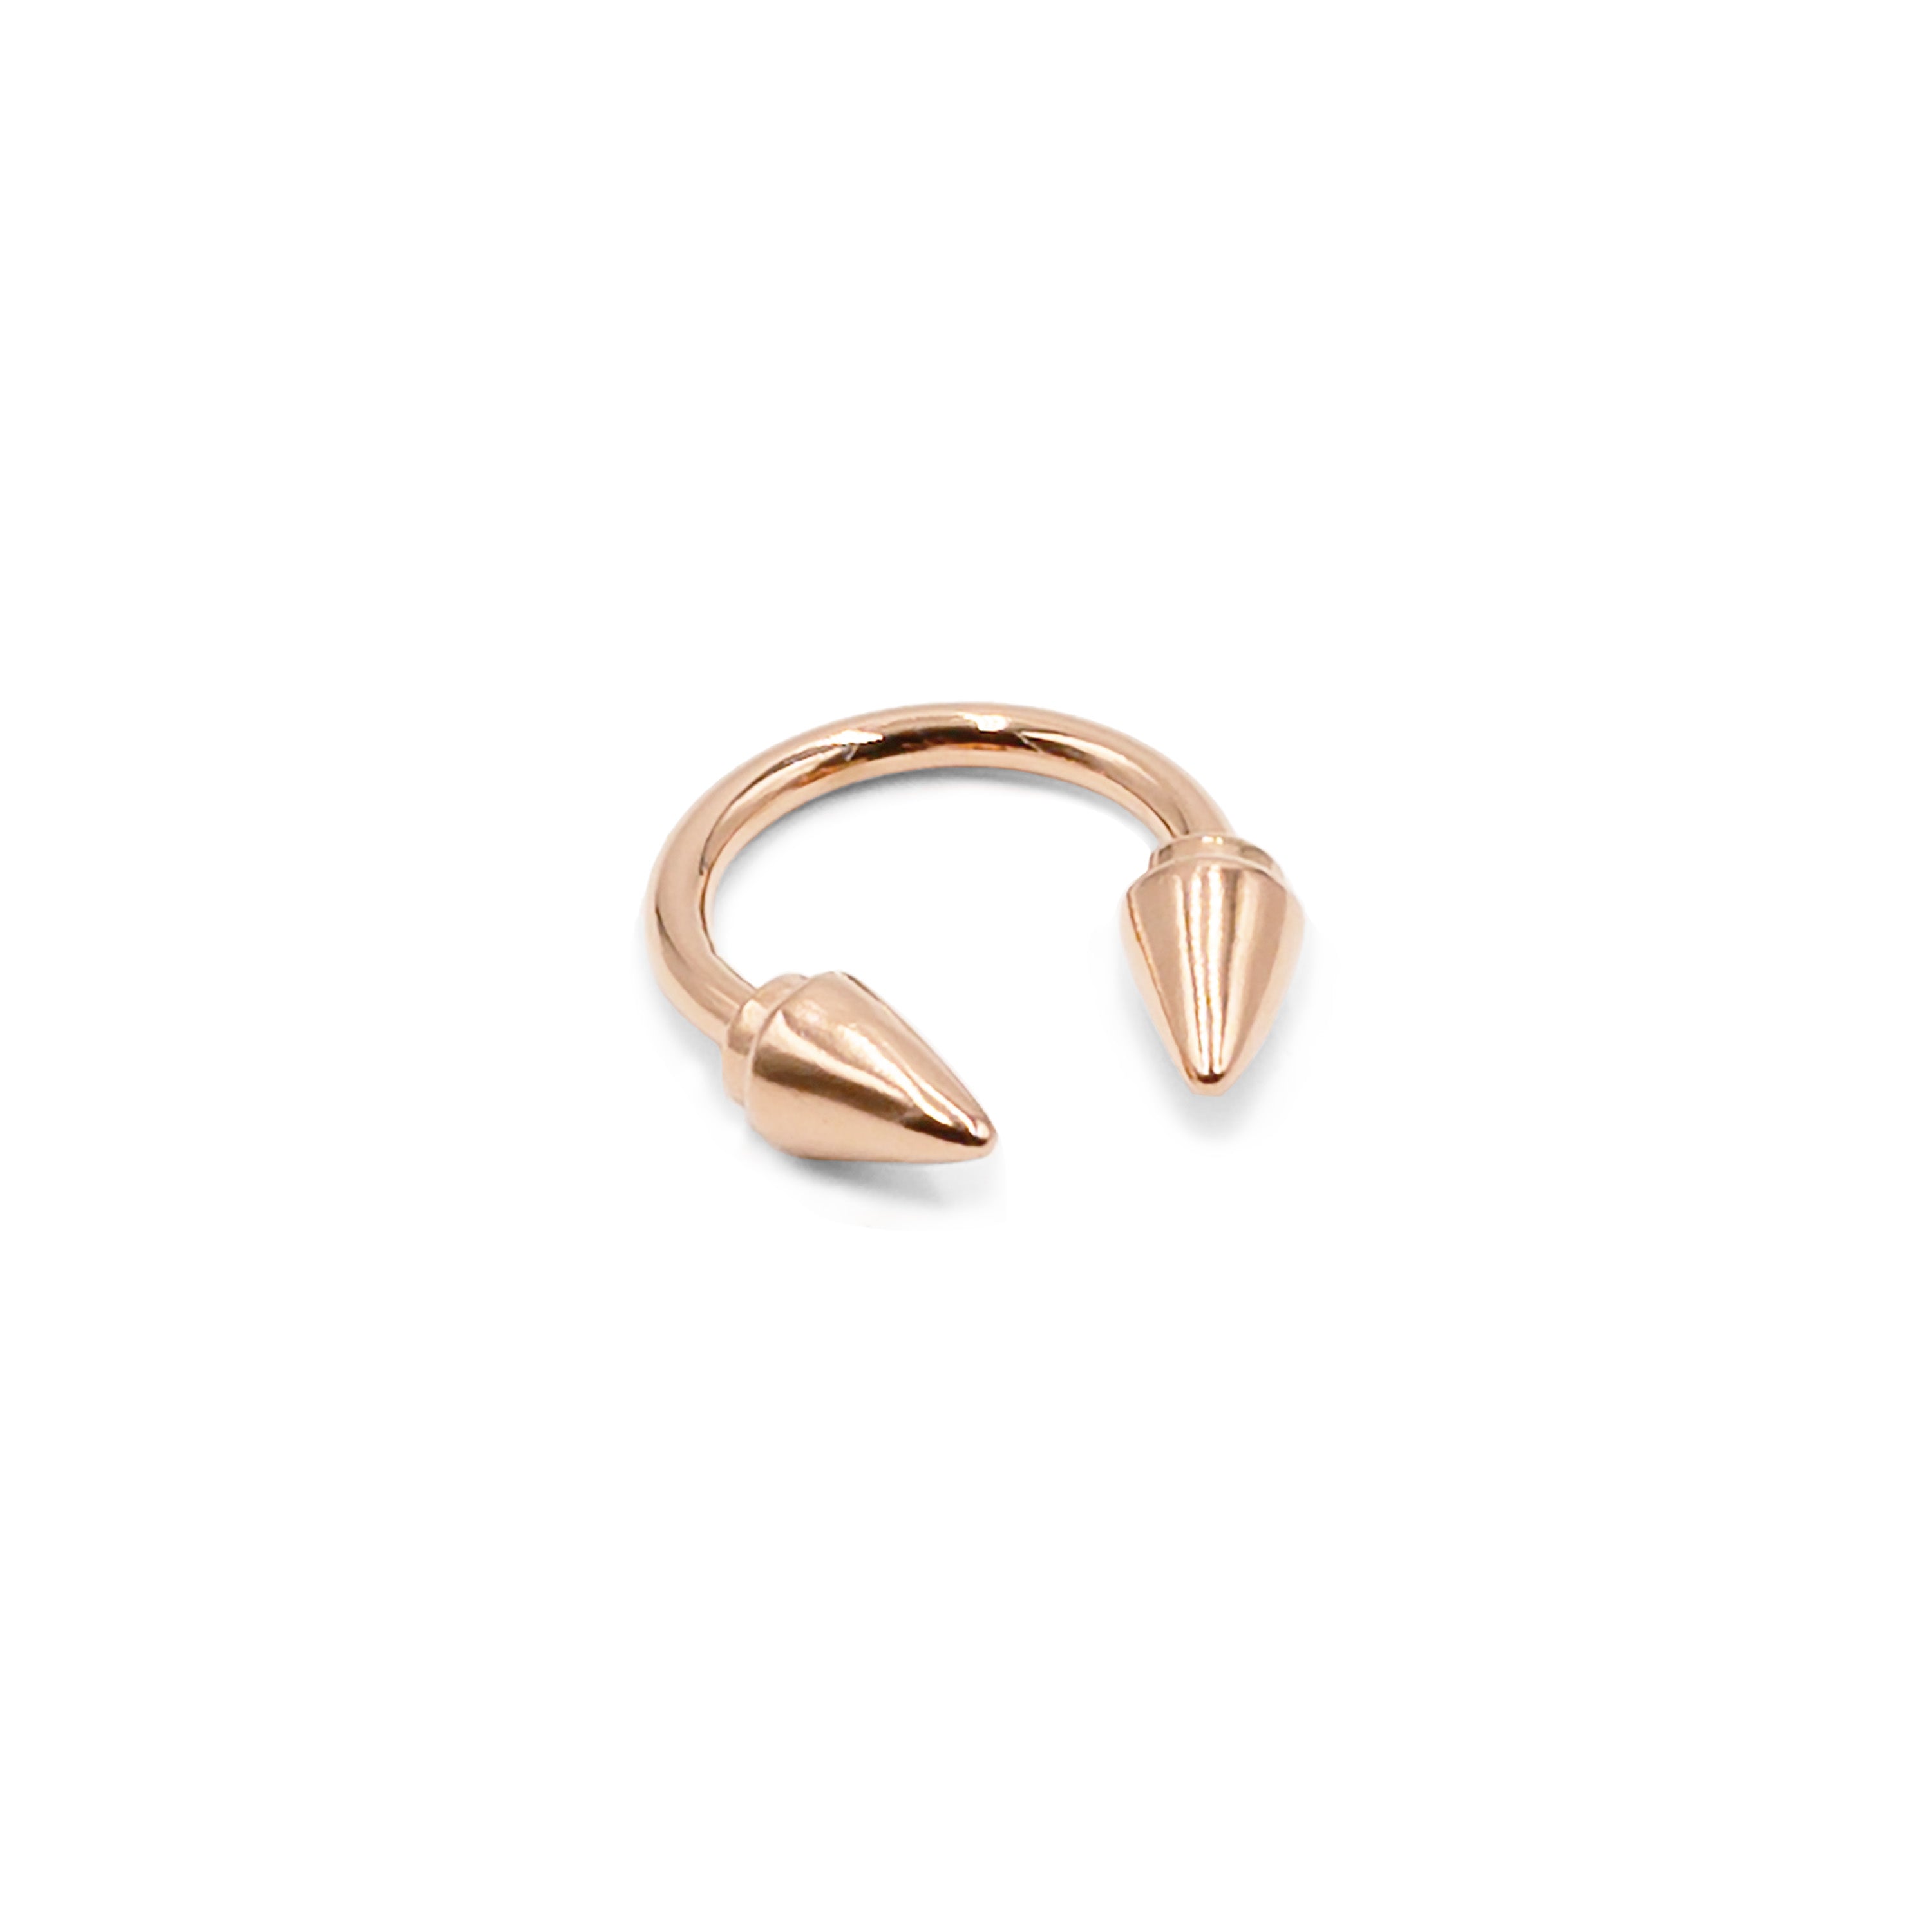 Spike Collection - Rose Gold Ring fine designer jewelry for men and women